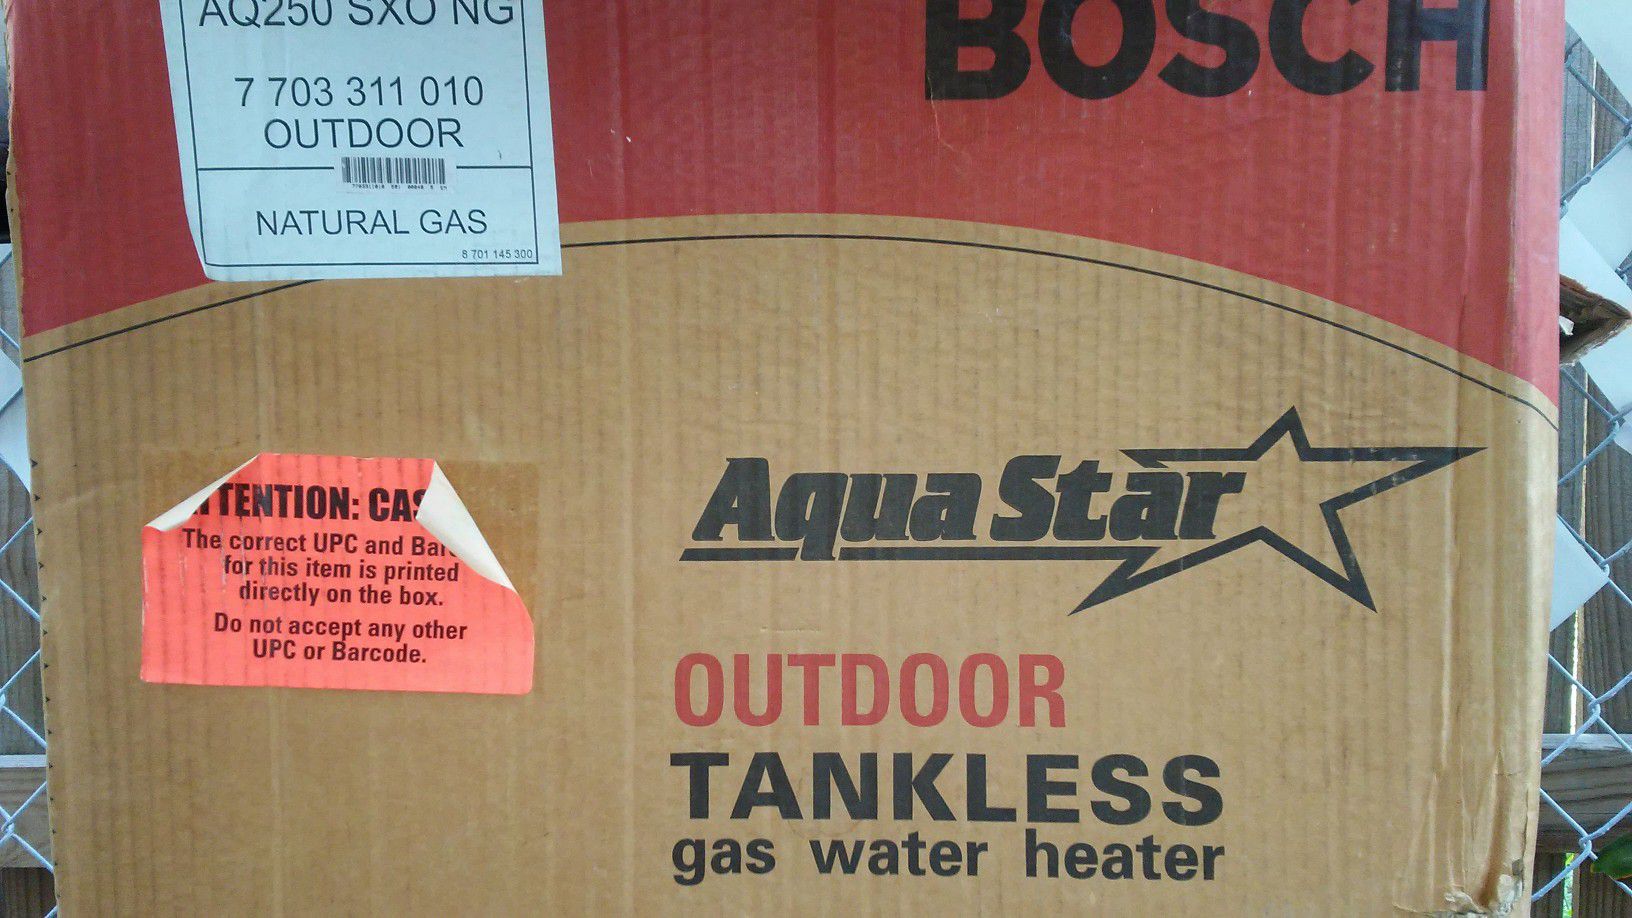 NEW BOSCH OUTDOOR VENTING TANKLESS GAS WATER HEATER